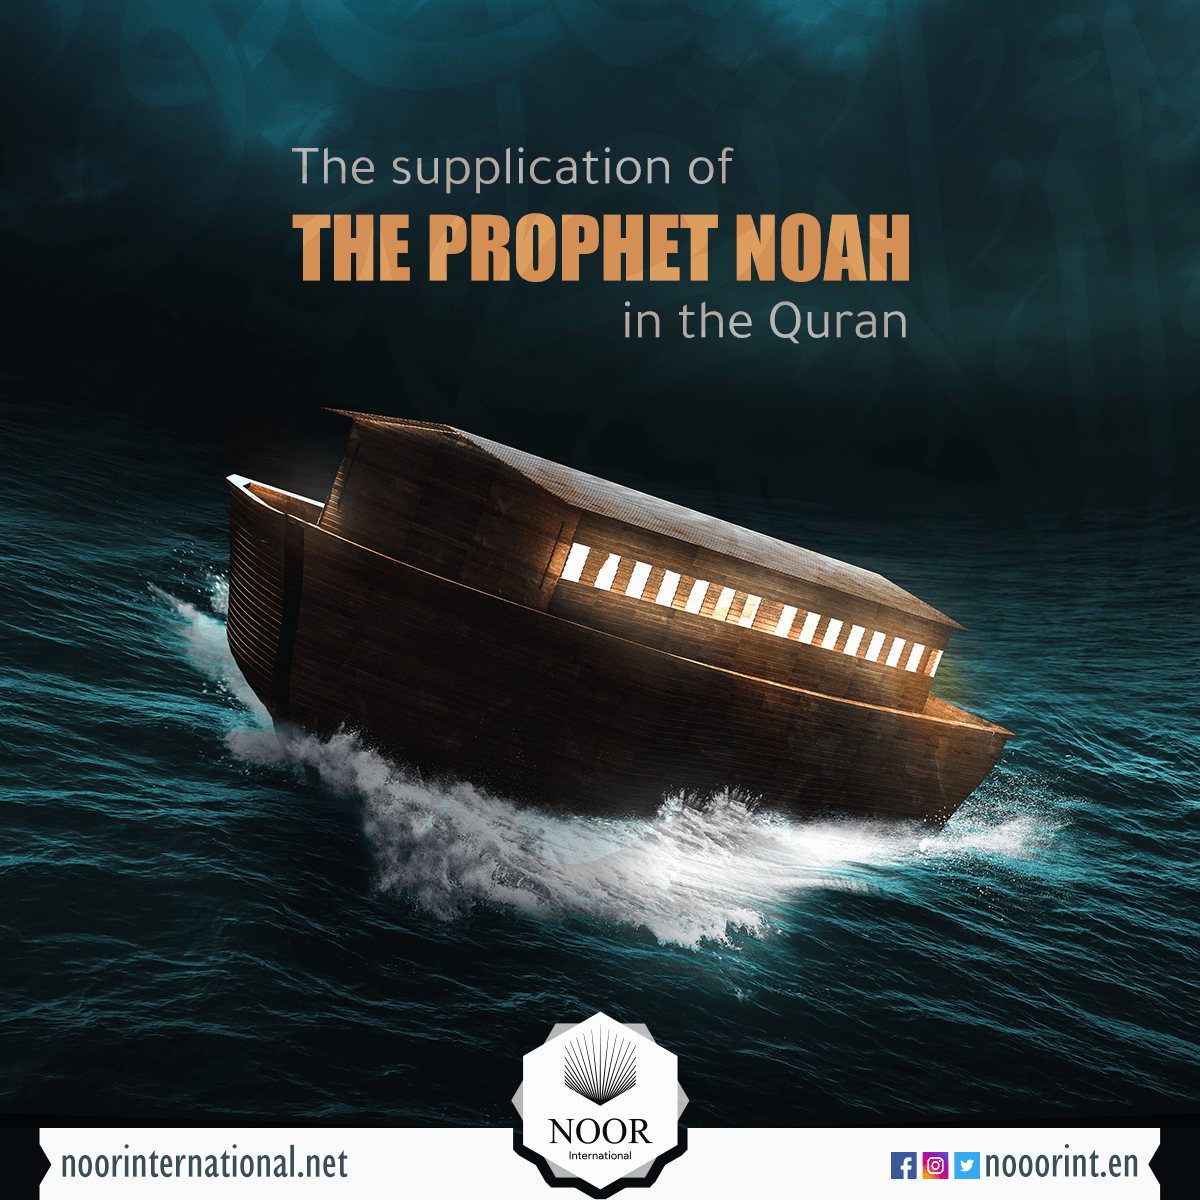 The supplication of the Prophet Noah in the Quran